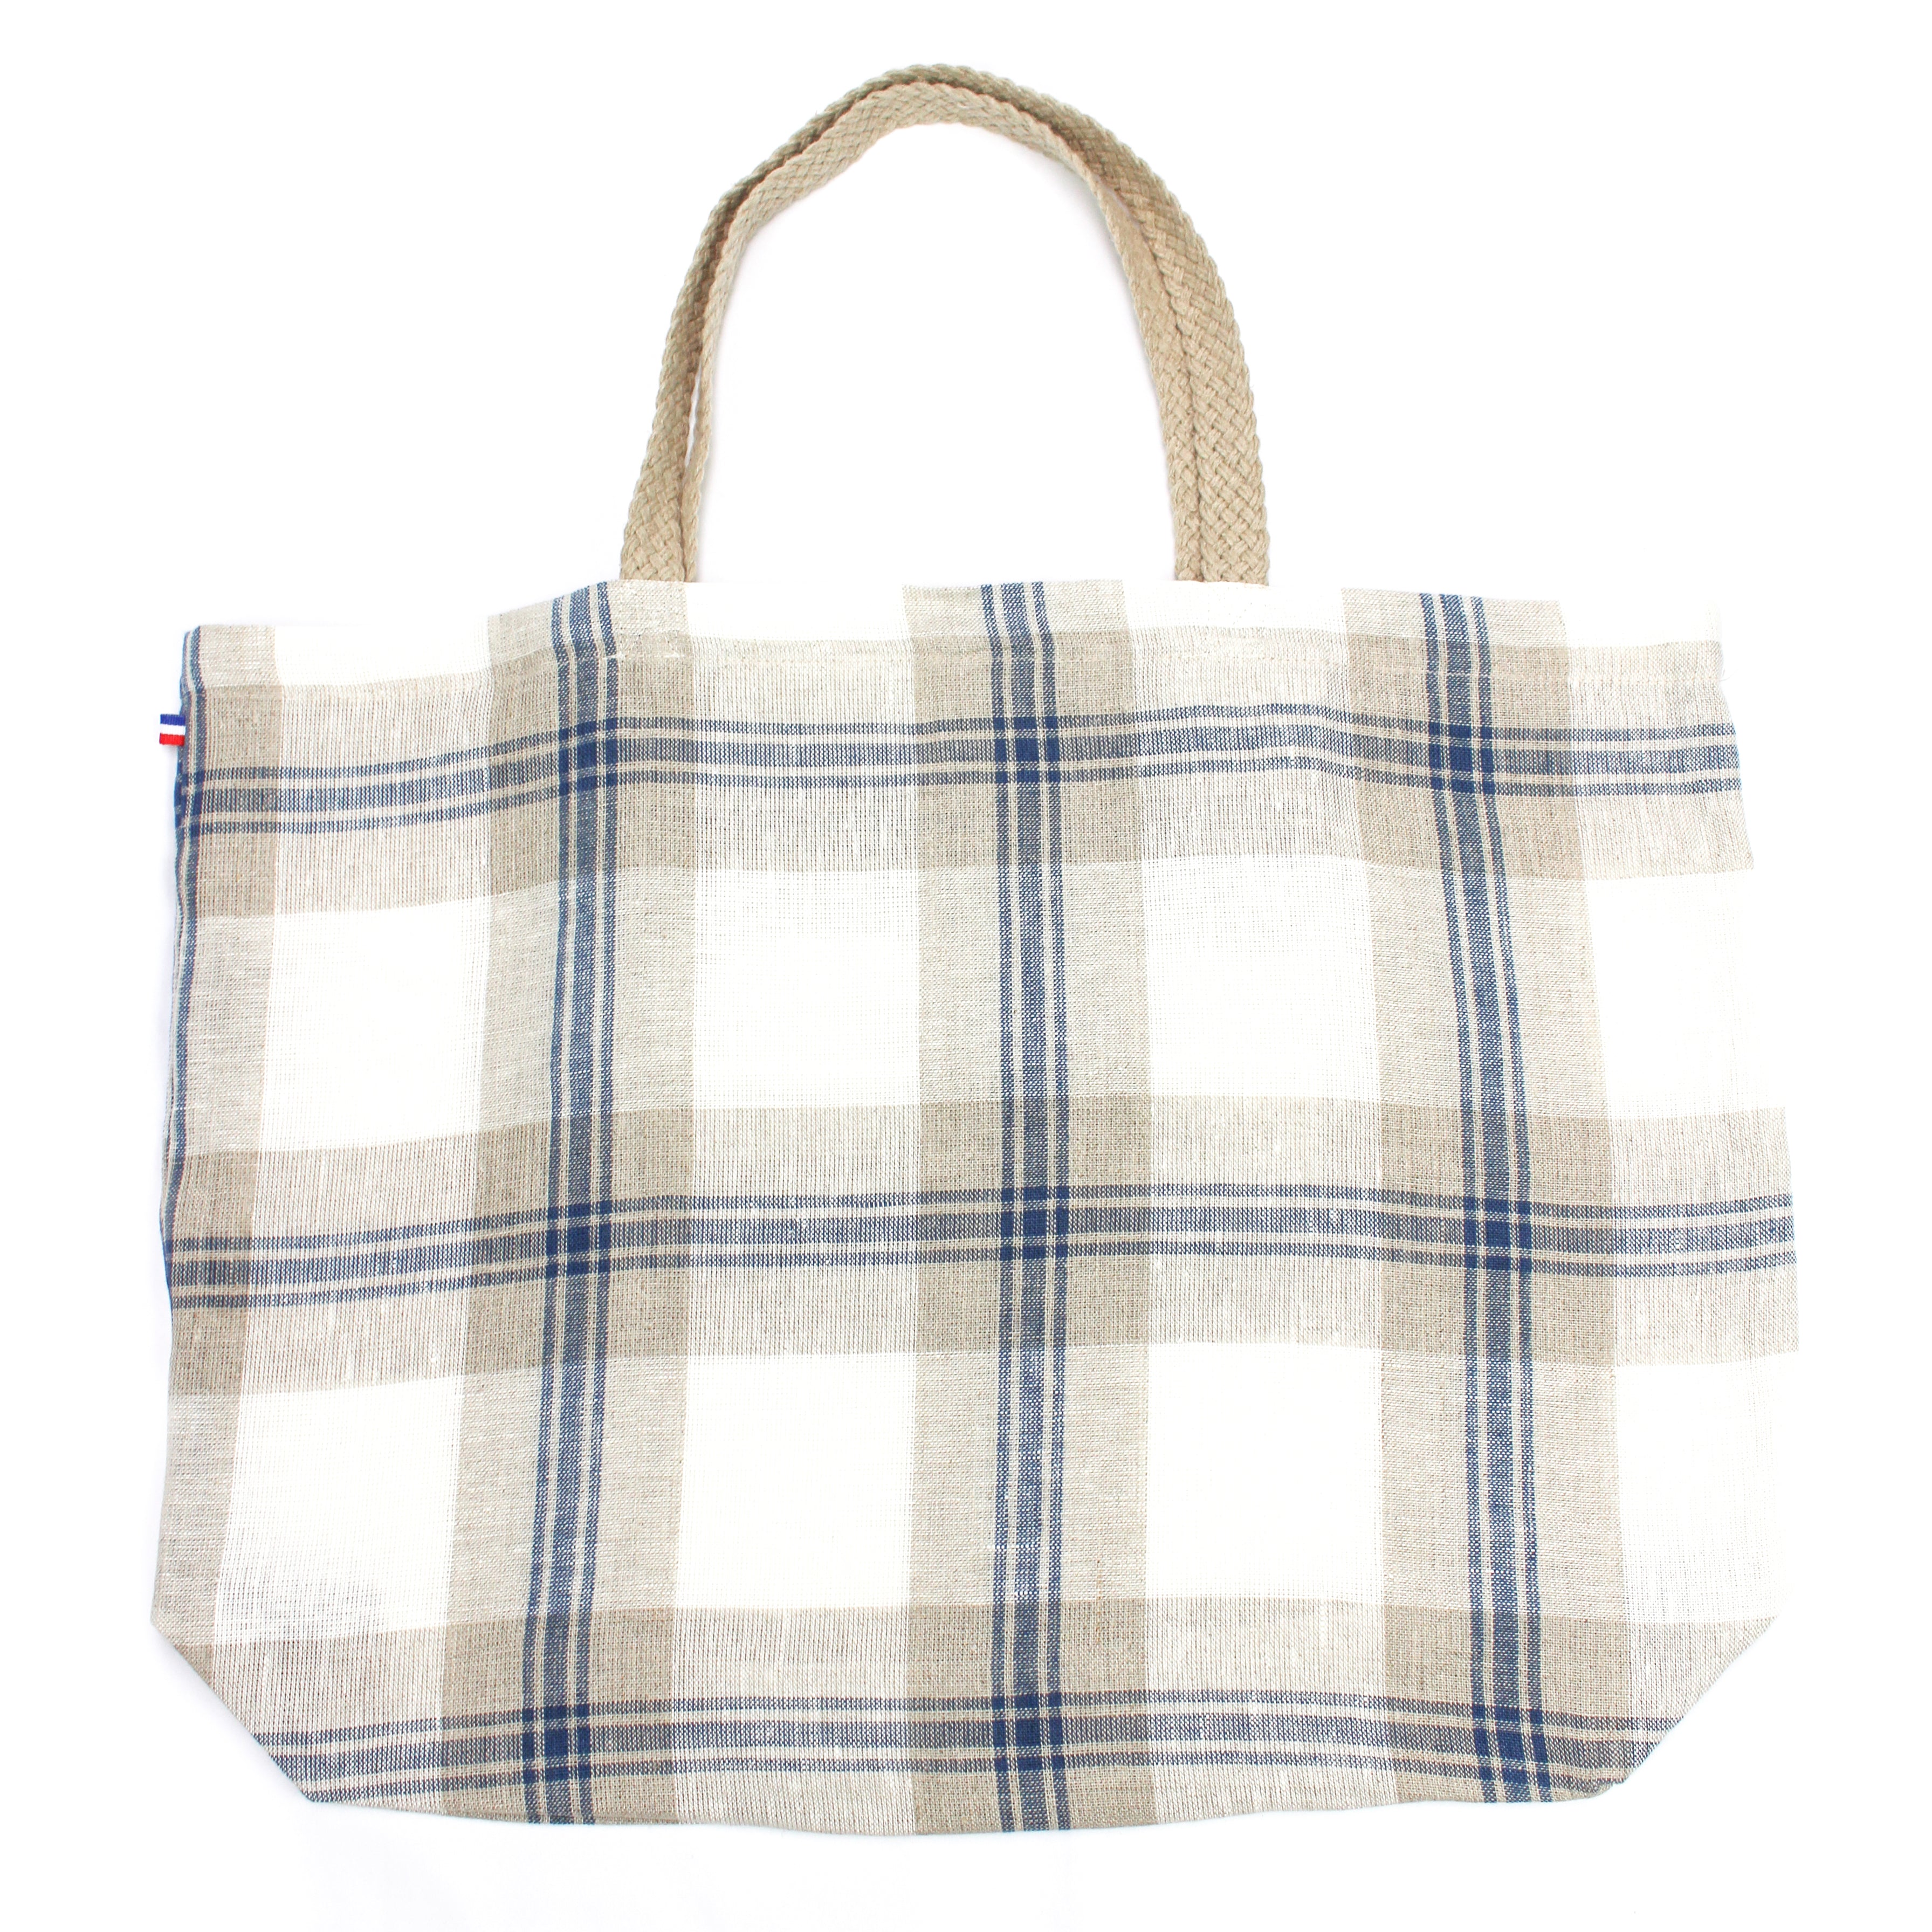 Cassandre Blue Plaid Thieffry Linen Shopping Bag with Braided Handle and Inner Zipper Pocket - Textile - Thieffry - Brand_Thieffry - New Arrivals - Shopping Bags - Textiles_Tote Bags - Thieffry - IMG_0327_edit